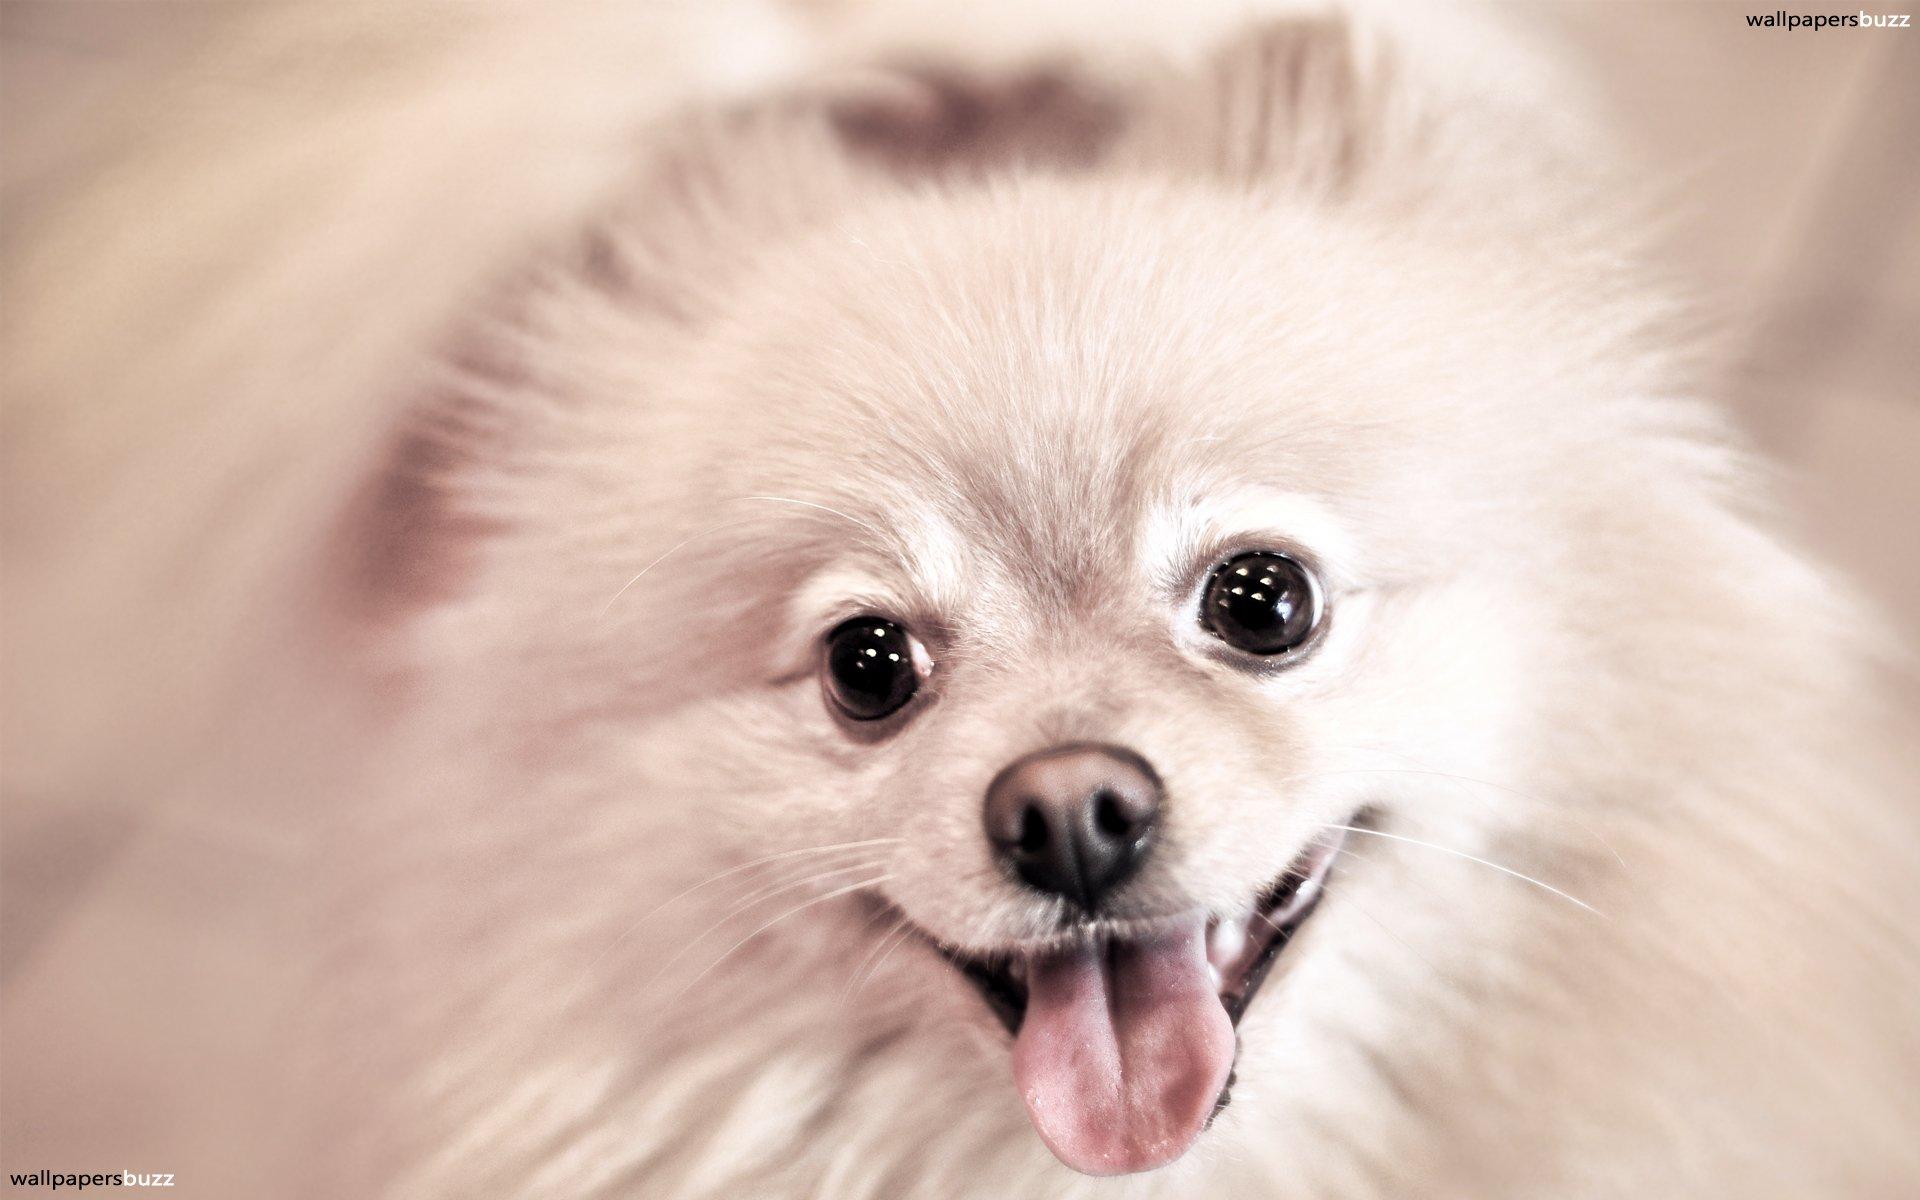 Smile Dog Wallpapers - Wallpaper Cave